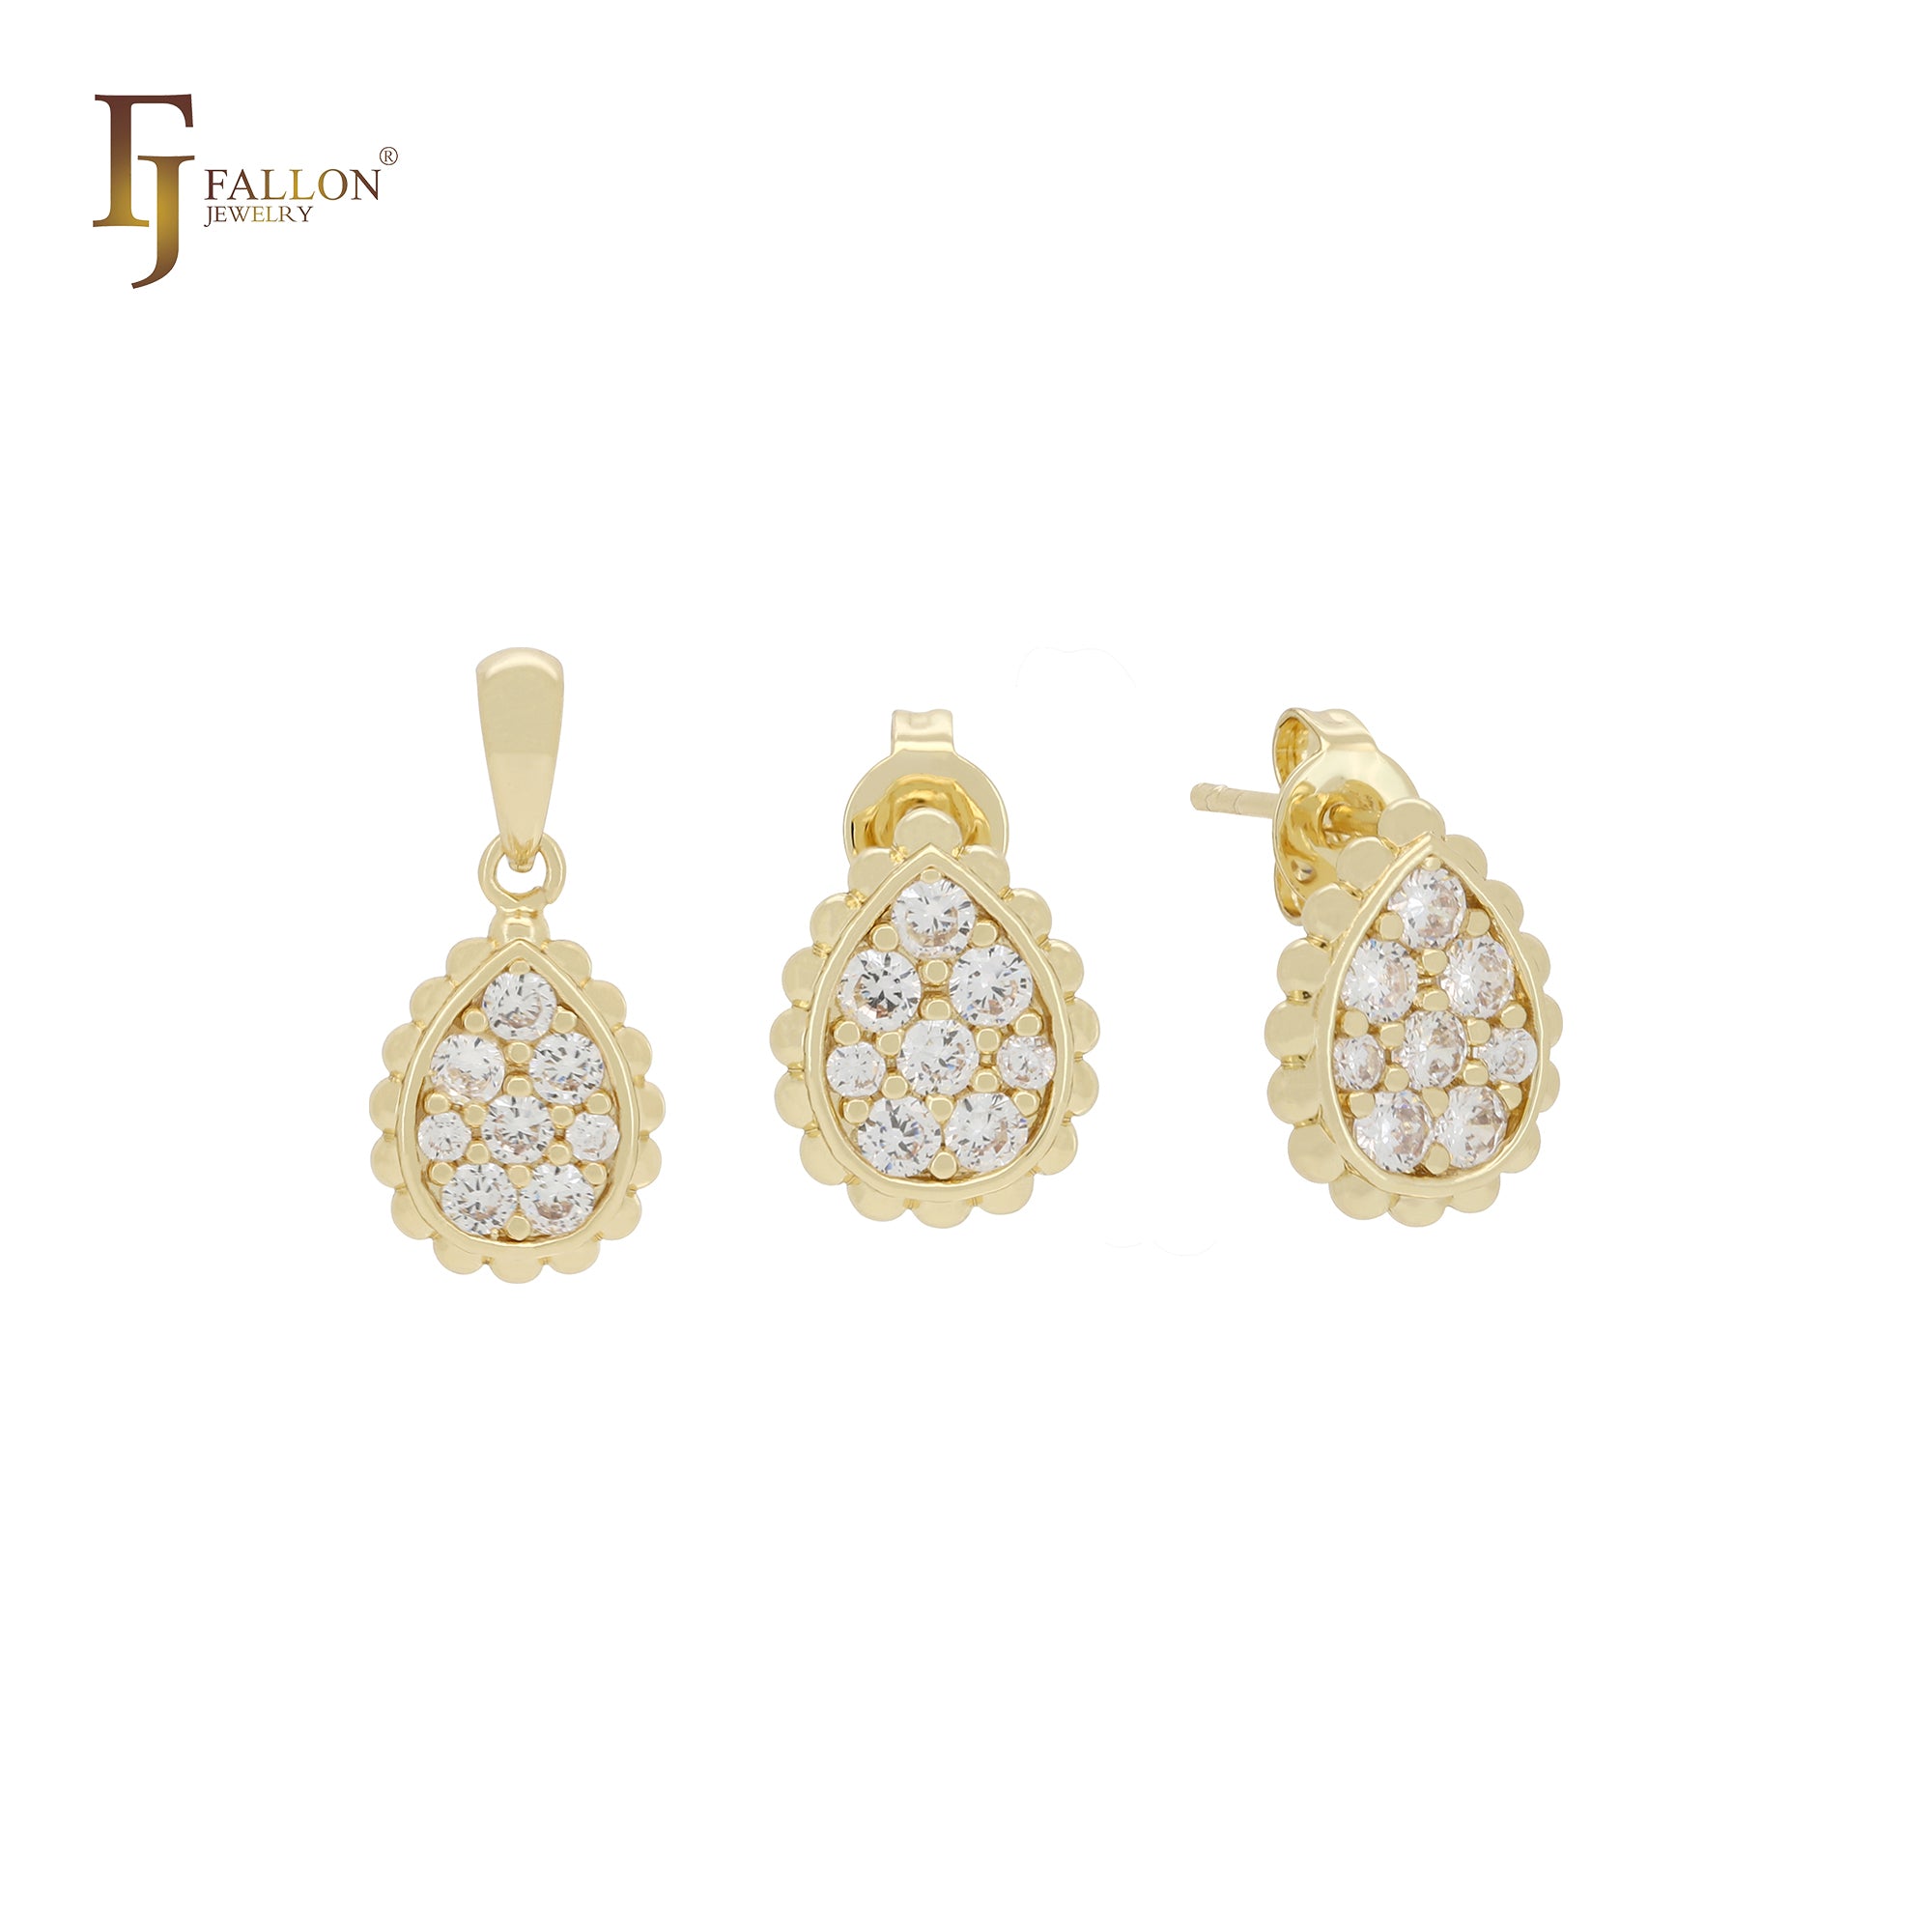 Petit tiny Teardrop shape cluster white rounded CZs 14k Gold Jewelry Set with Pendant and Stud Earrings